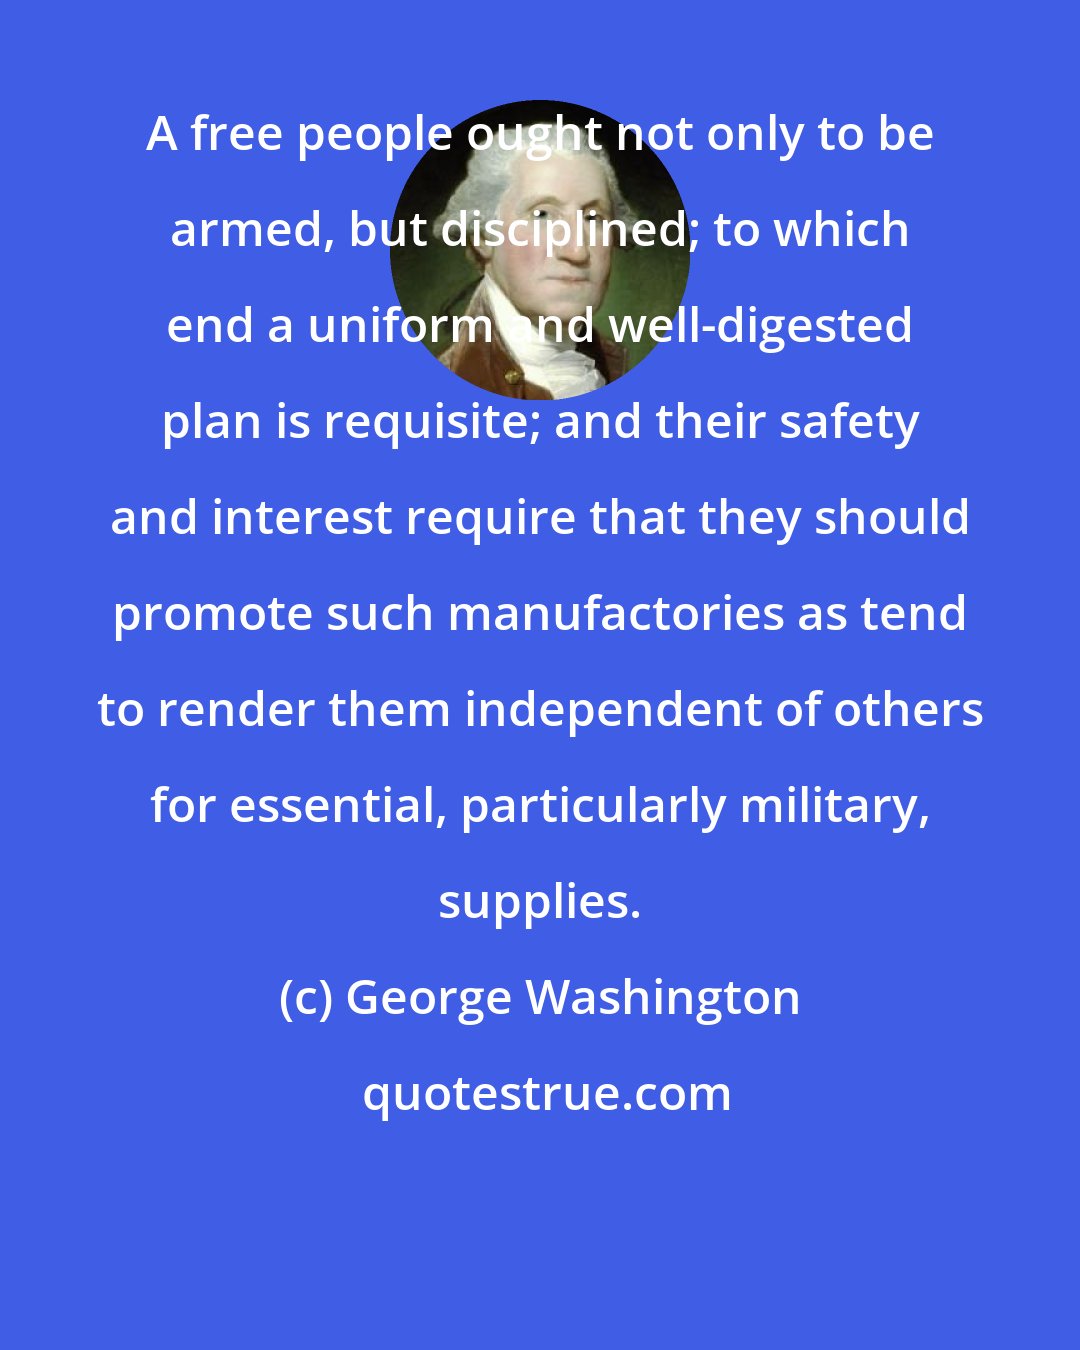 George Washington: A free people ought not only to be armed, but disciplined; to which end a uniform and well-digested plan is requisite; and their safety and interest require that they should promote such manufactories as tend to render them independent of others for essential, particularly military, supplies.